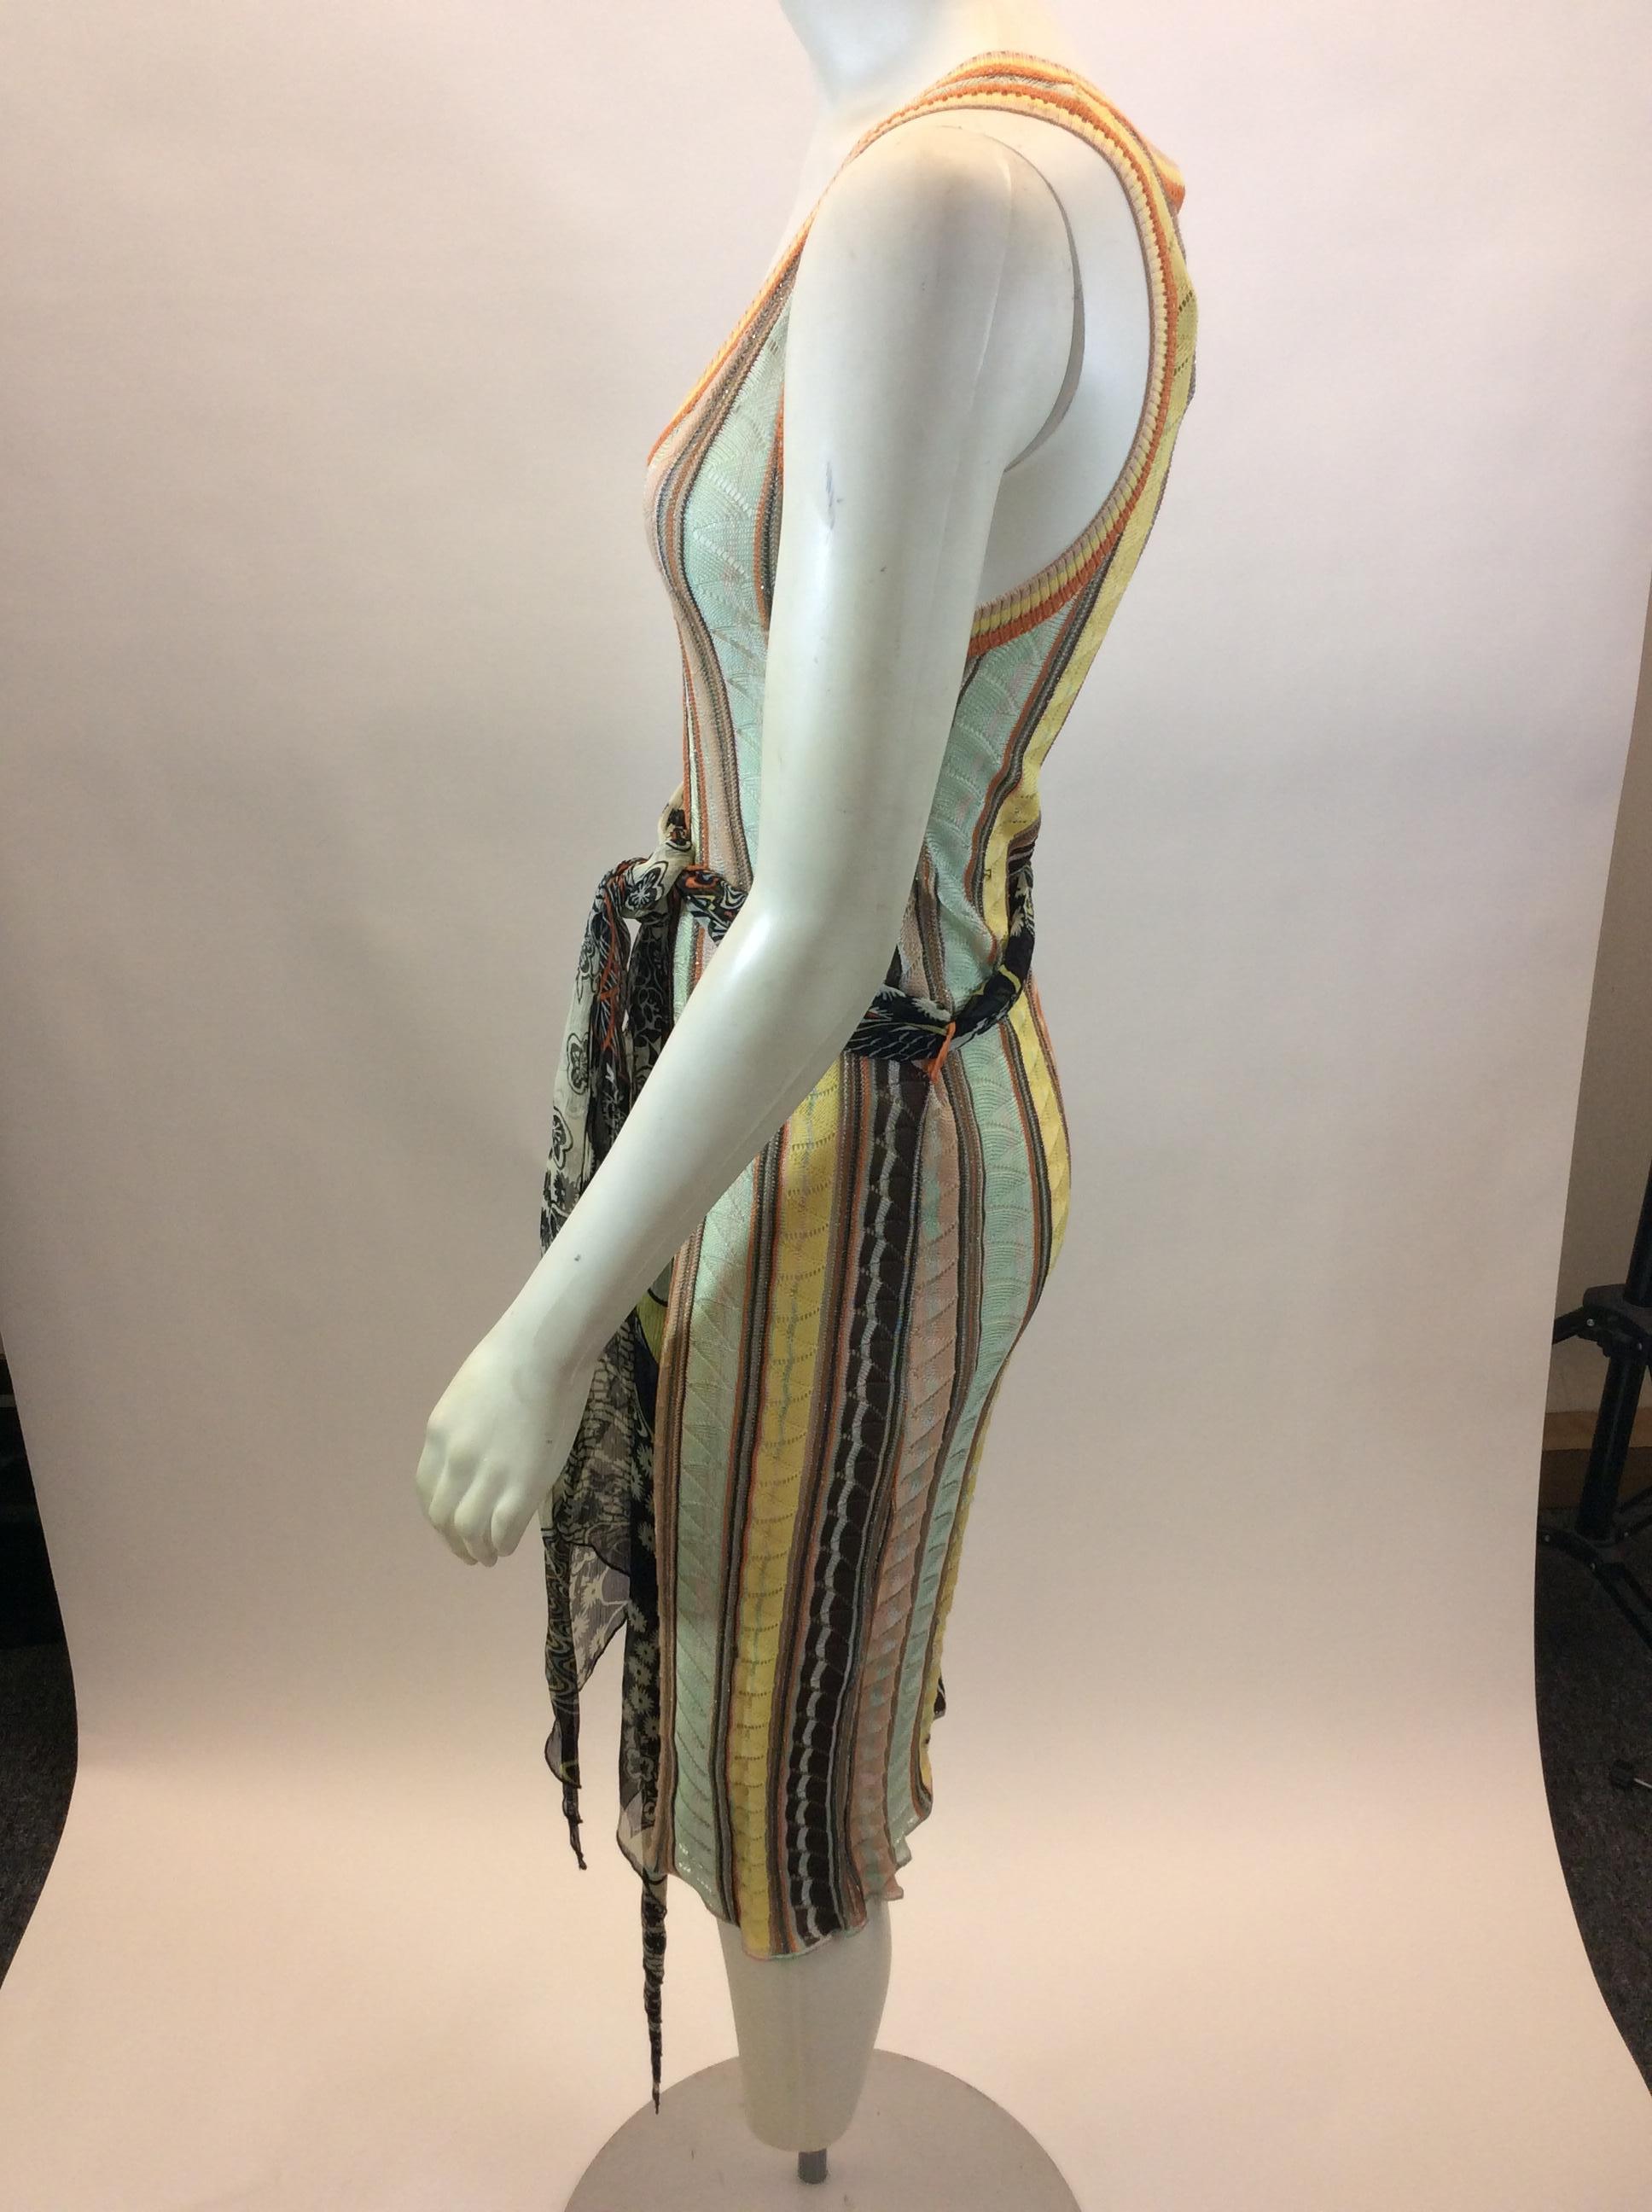 Missoni Multi- Color Stripe Dress
$178
Made in Italy
66% cotton, 33% viscose, 1% elastane
Comes with slip
Size 4
Length 40